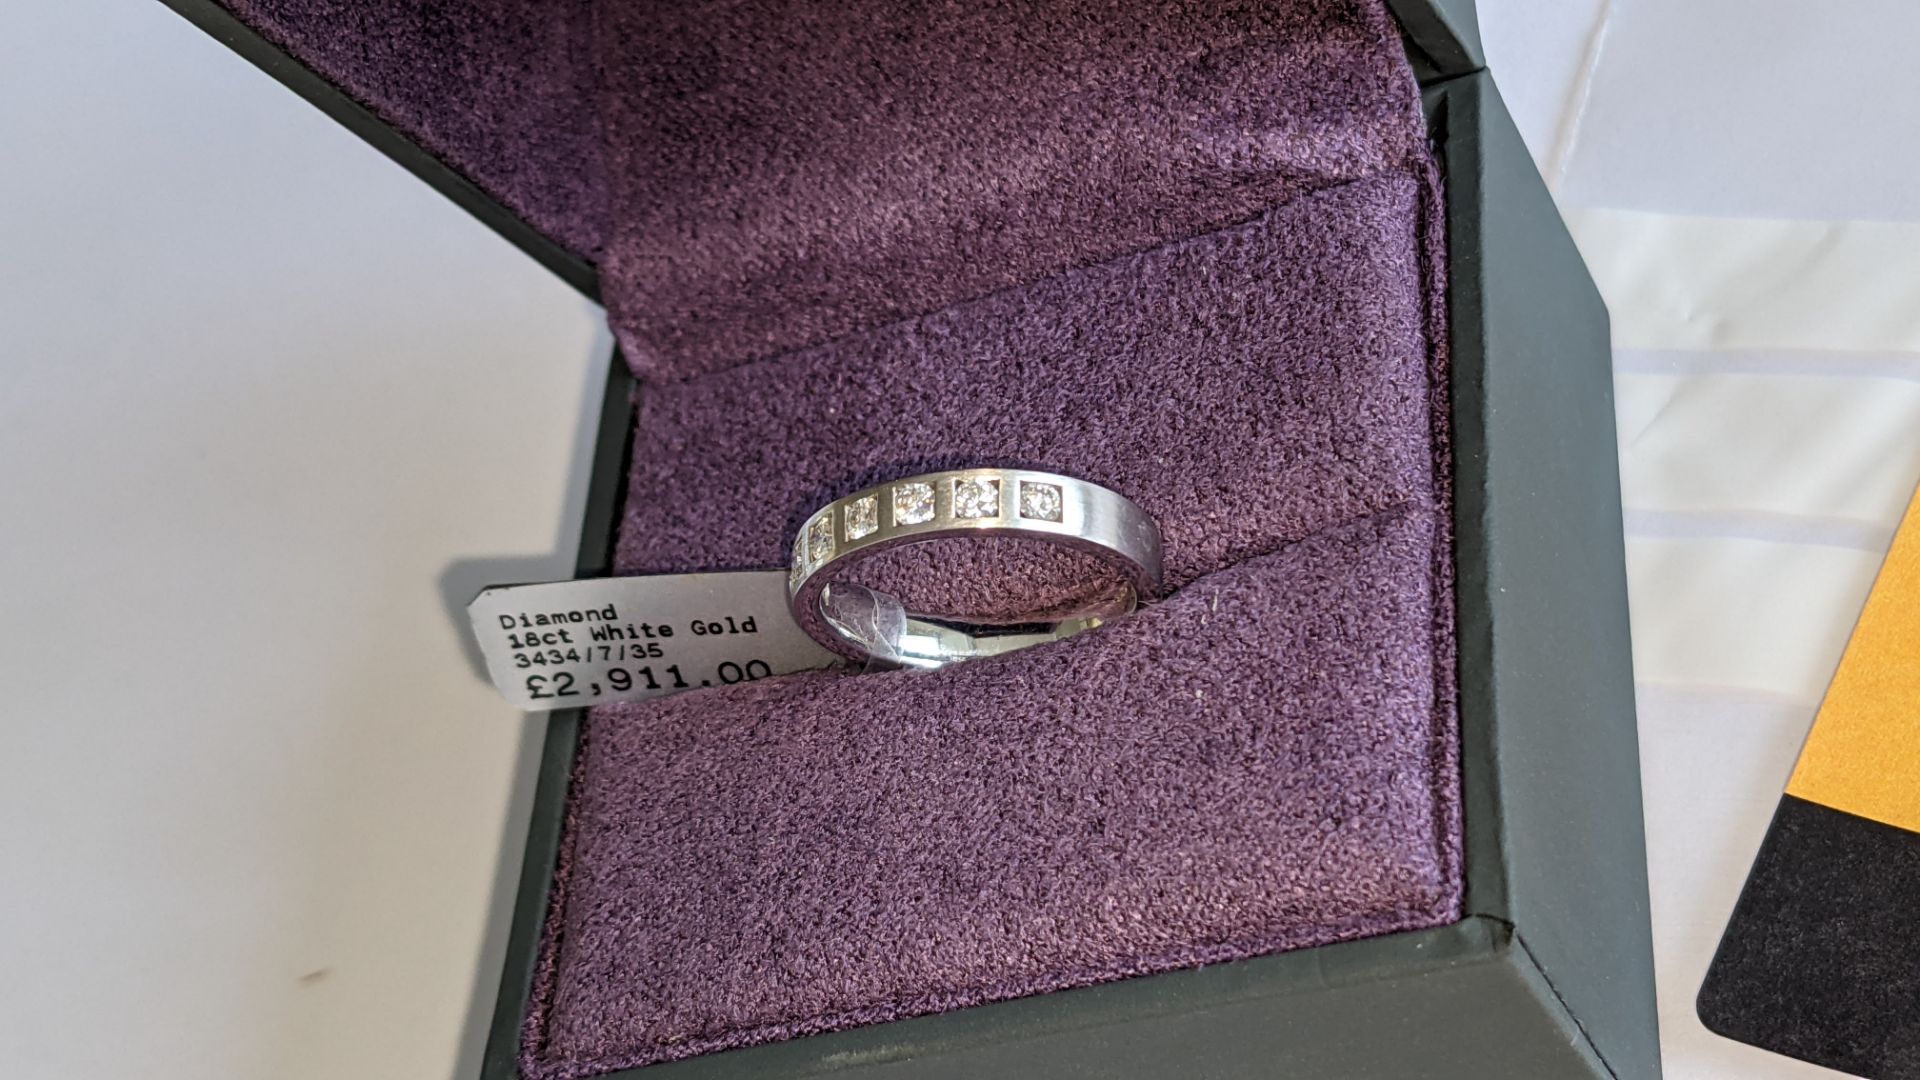 18ct white gold & diamond ring with 7 stones each weighing 0.05ct. RRP £2,911 - Image 6 of 14